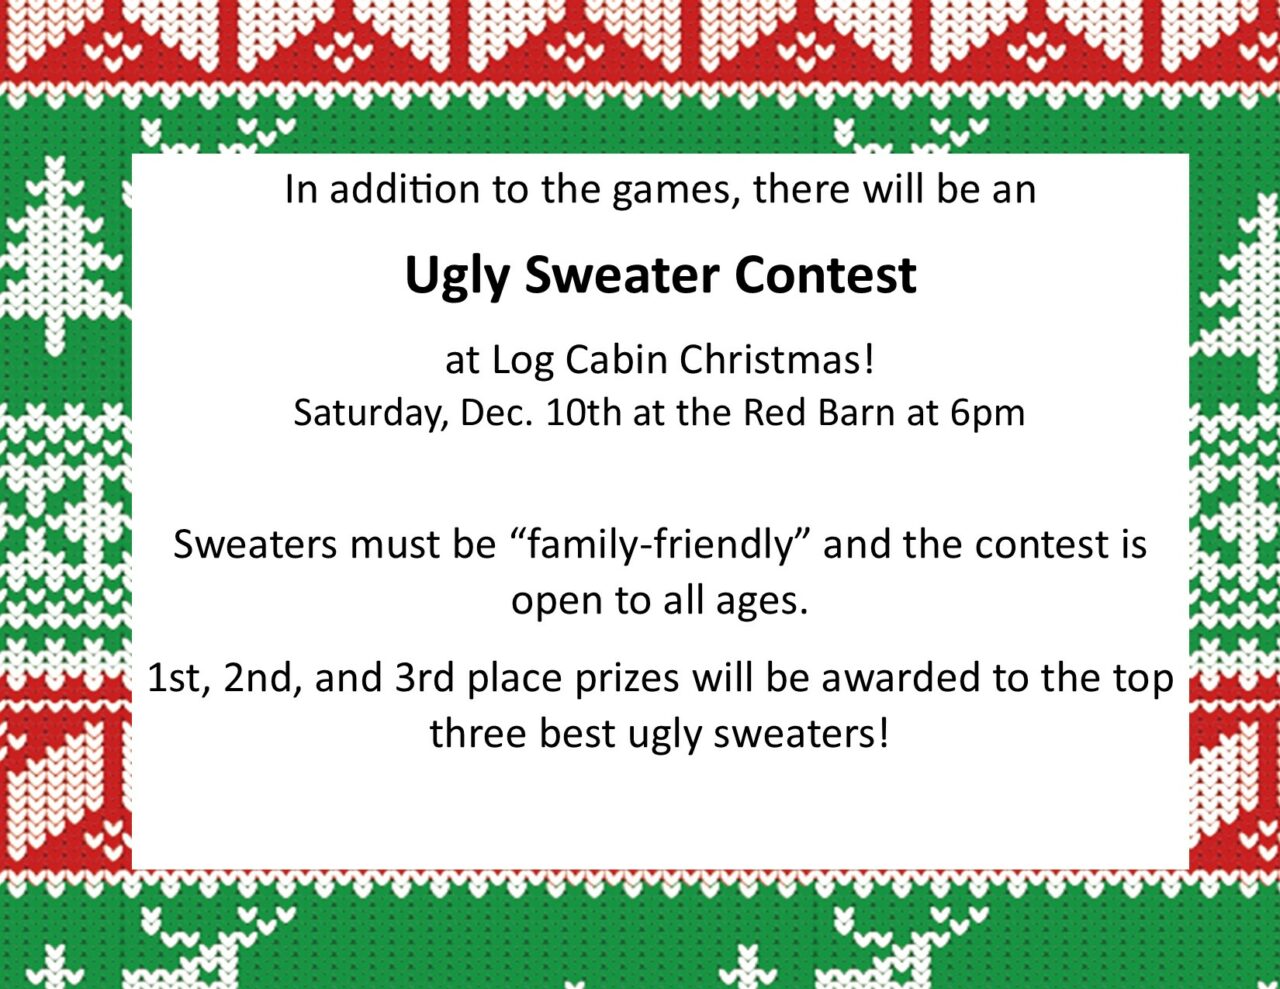 Ugly Sweater Contest At Log Cabin Christmas 2 Ugly sweater contest CedarCreekLake.Online